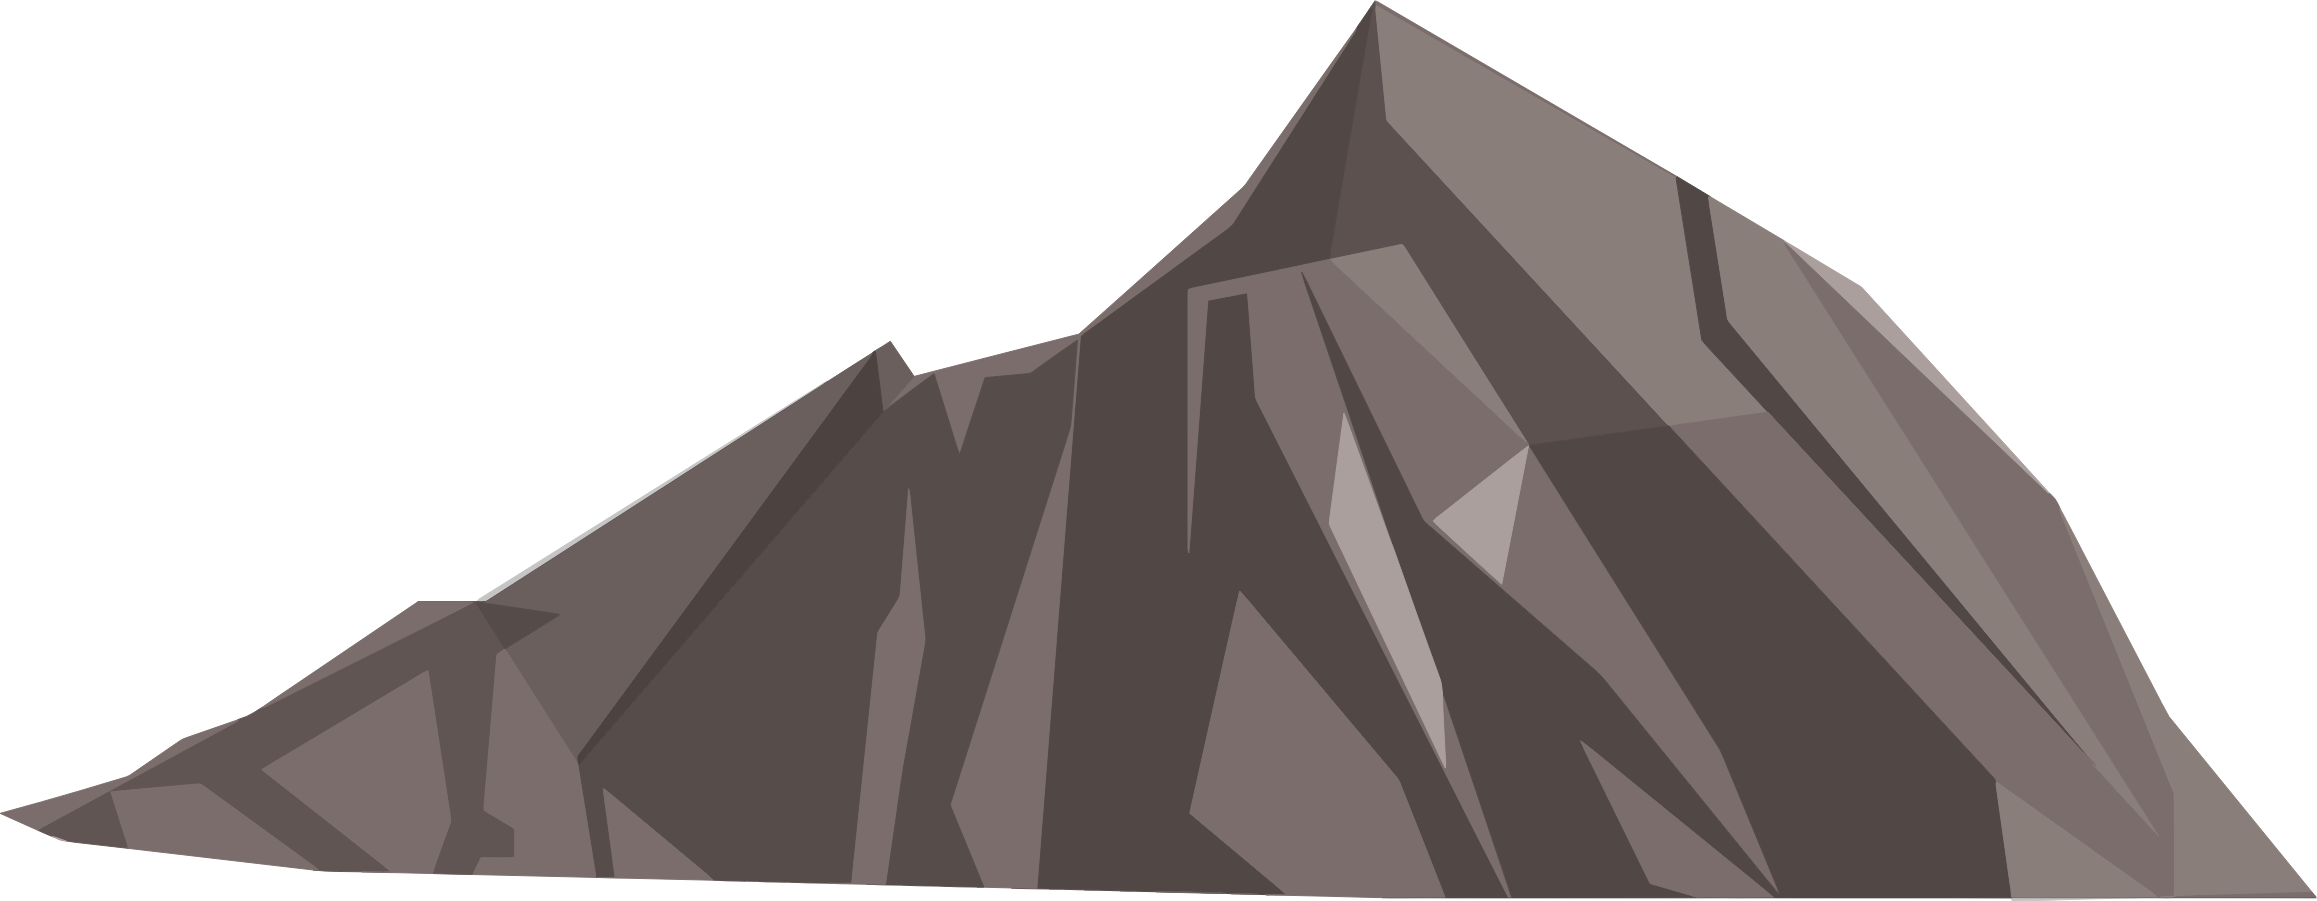 Mountains Background PNG